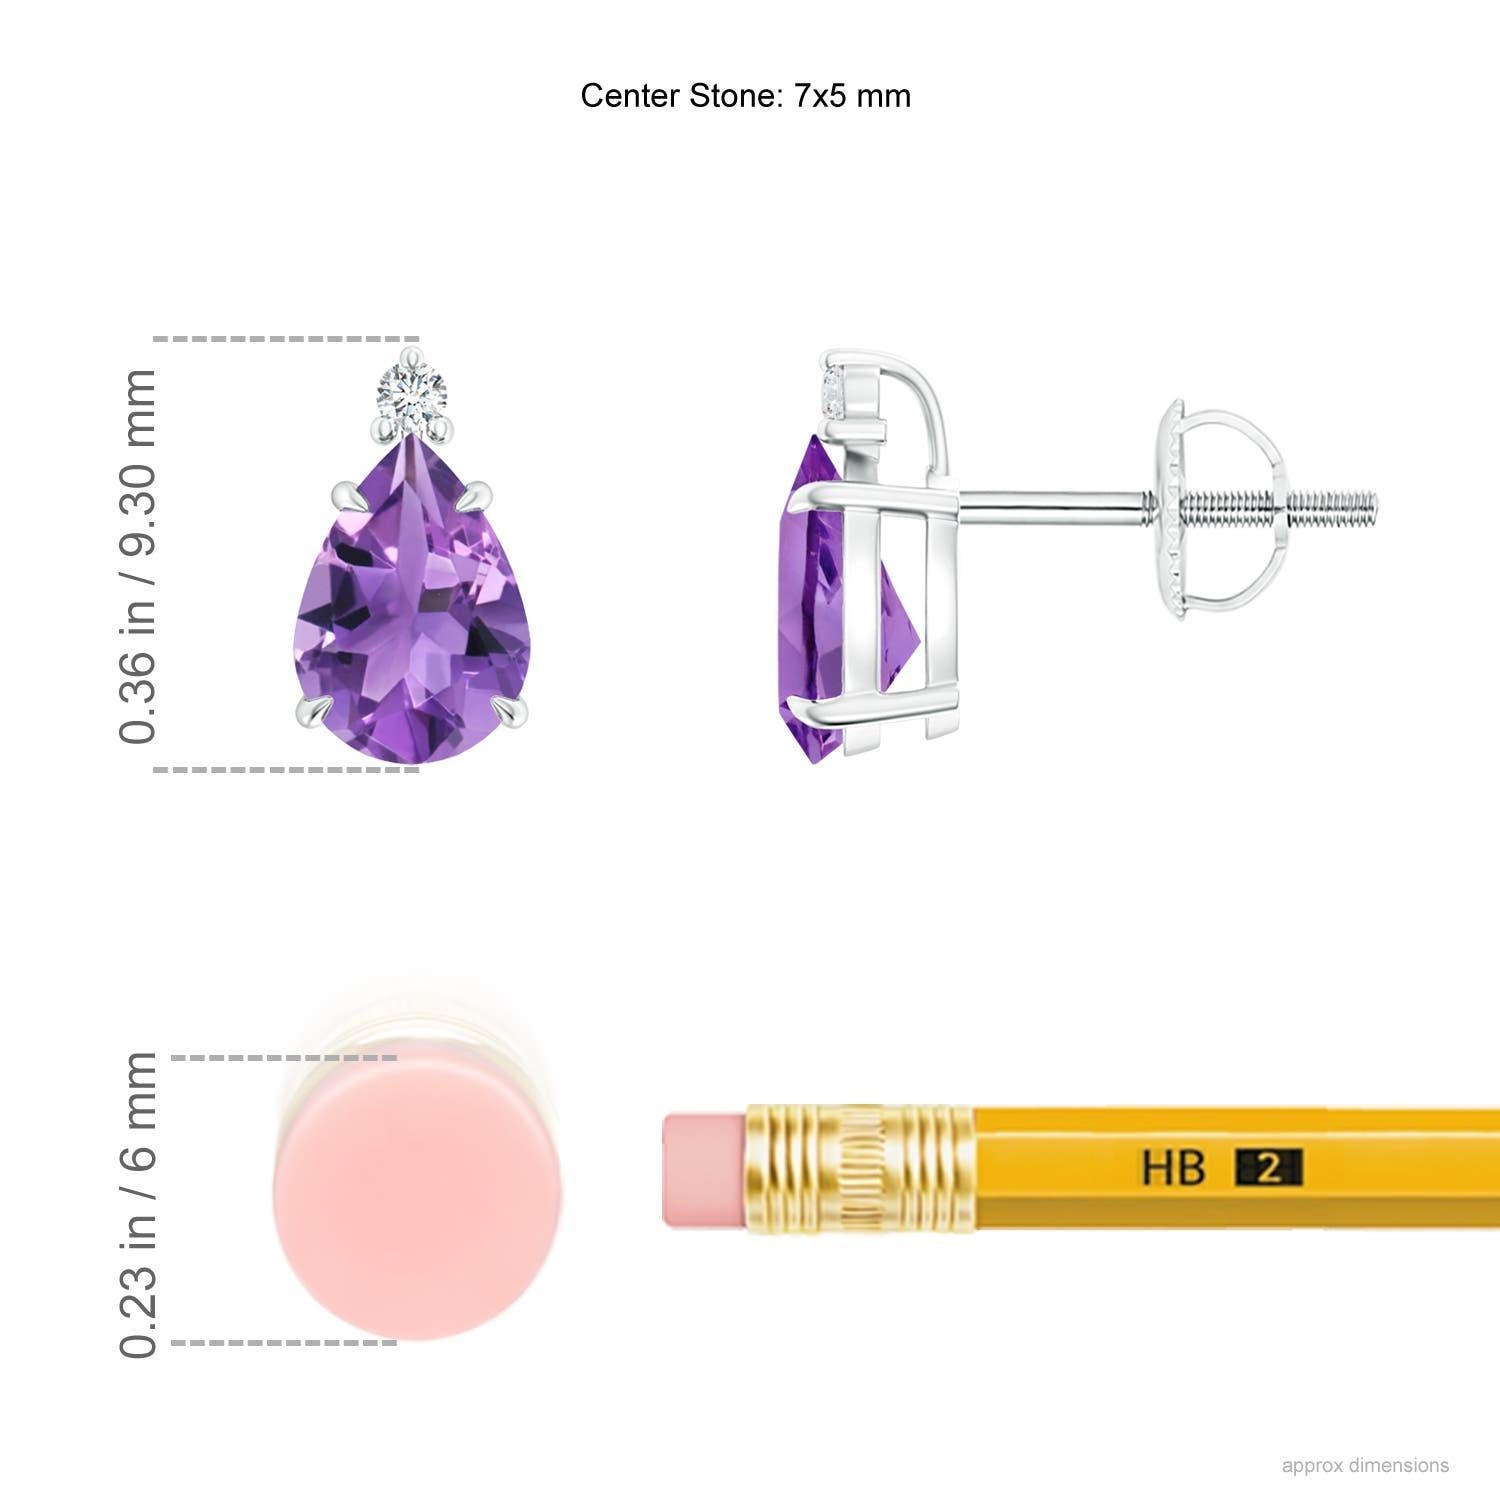 Inverted pear-shaped amethysts, secured in claw settings, exude a striking deep purple hue. The brilliant round diamond at the tip lends added sparkle to these platinum solitaire amethyst earrings.